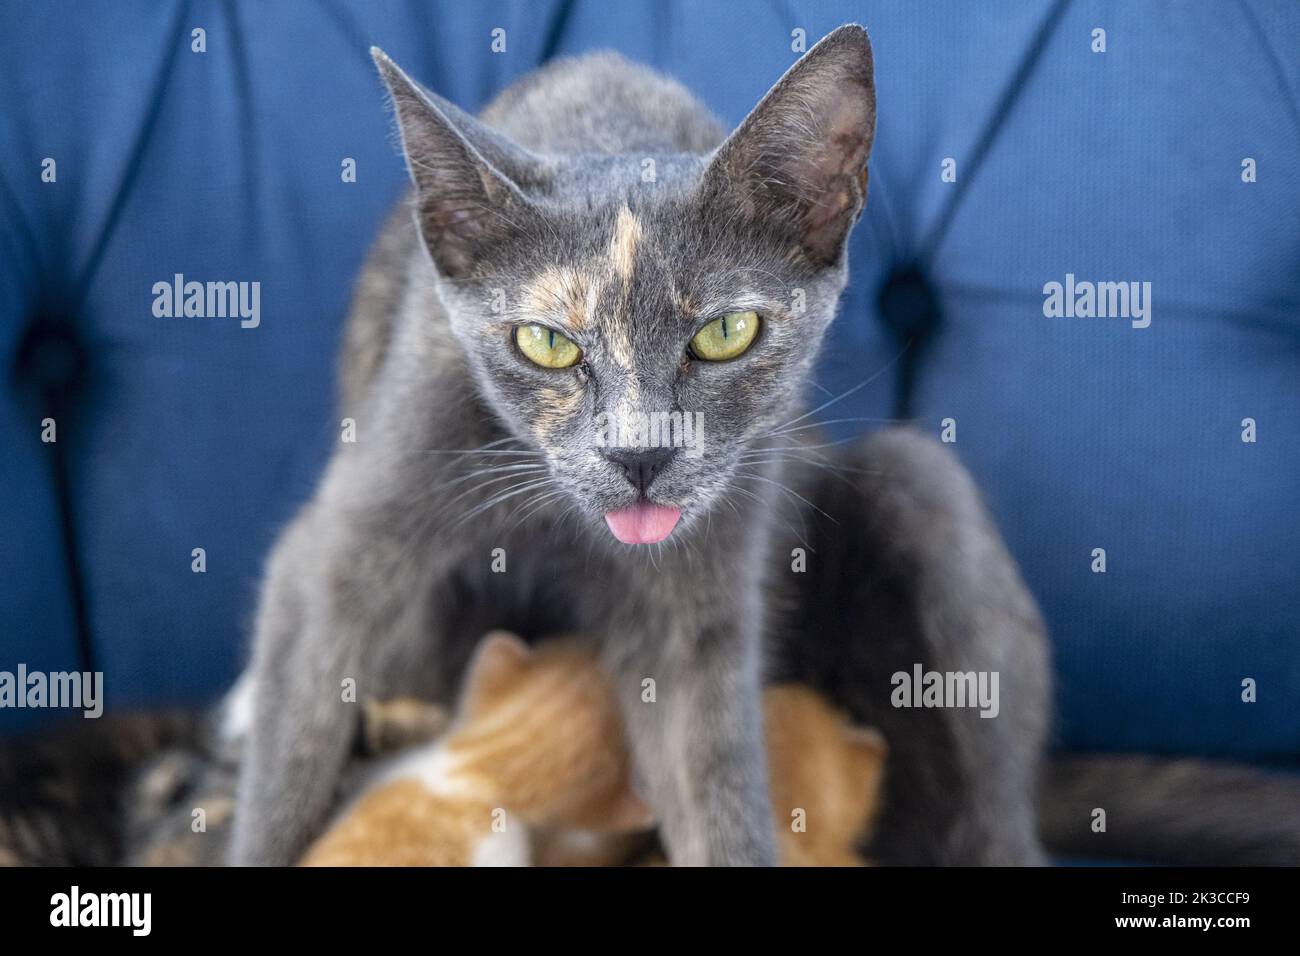 Mother cat tongue out looking and breasting her kittens, newborn cat concept, kitten idea, funny photo of cats, Stock Photo